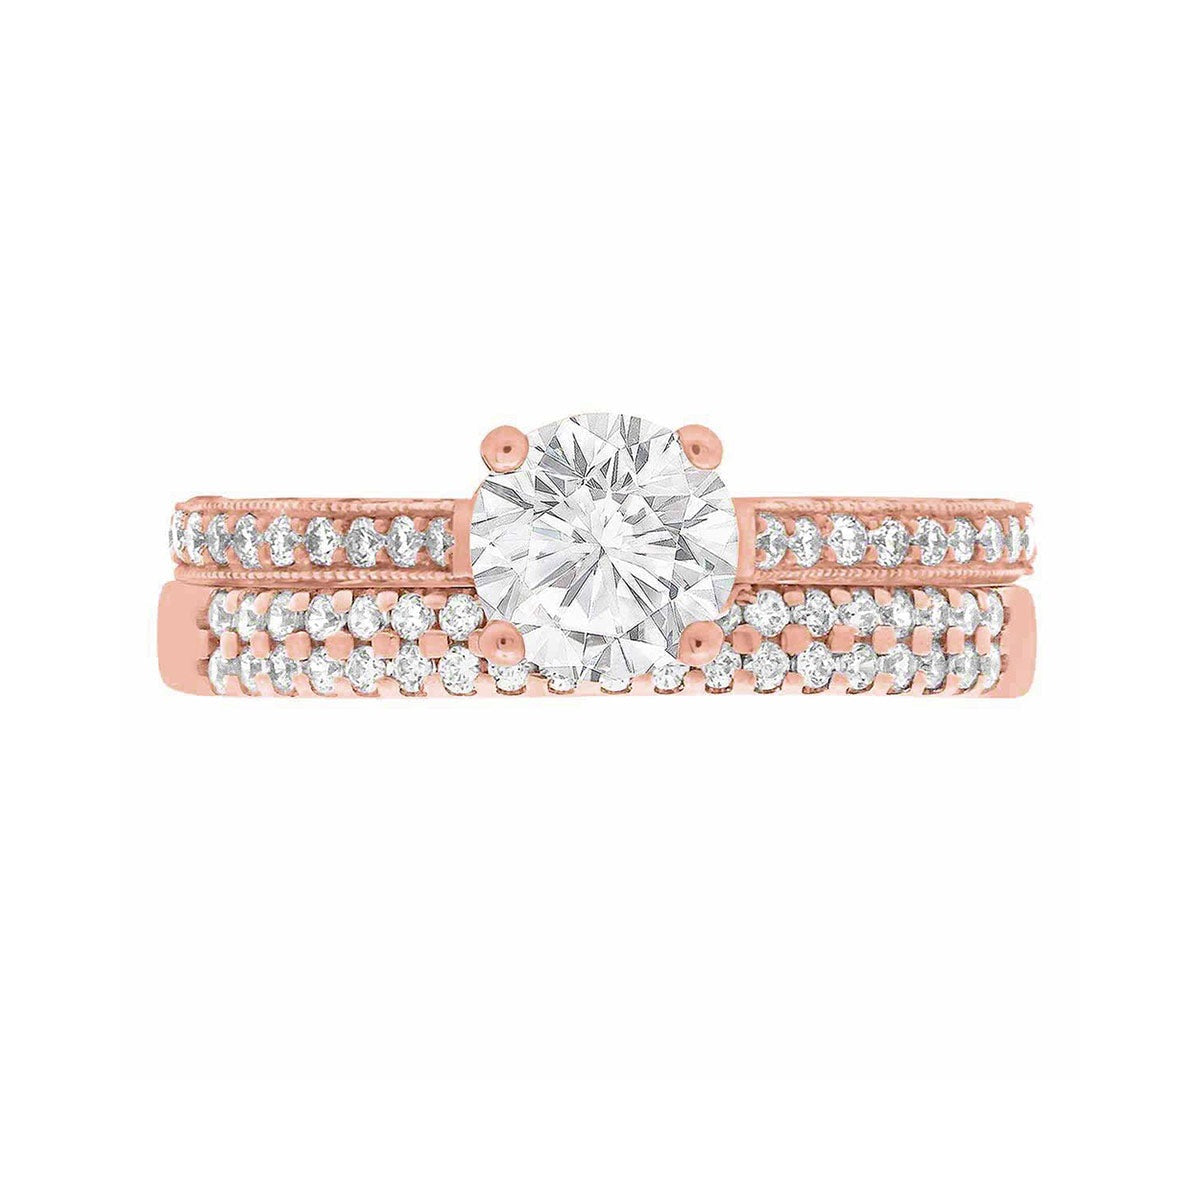 Thin Band Solitaire Ring with diamonds on sidewalls in rose gold pictured with a matching diamond wedding ring